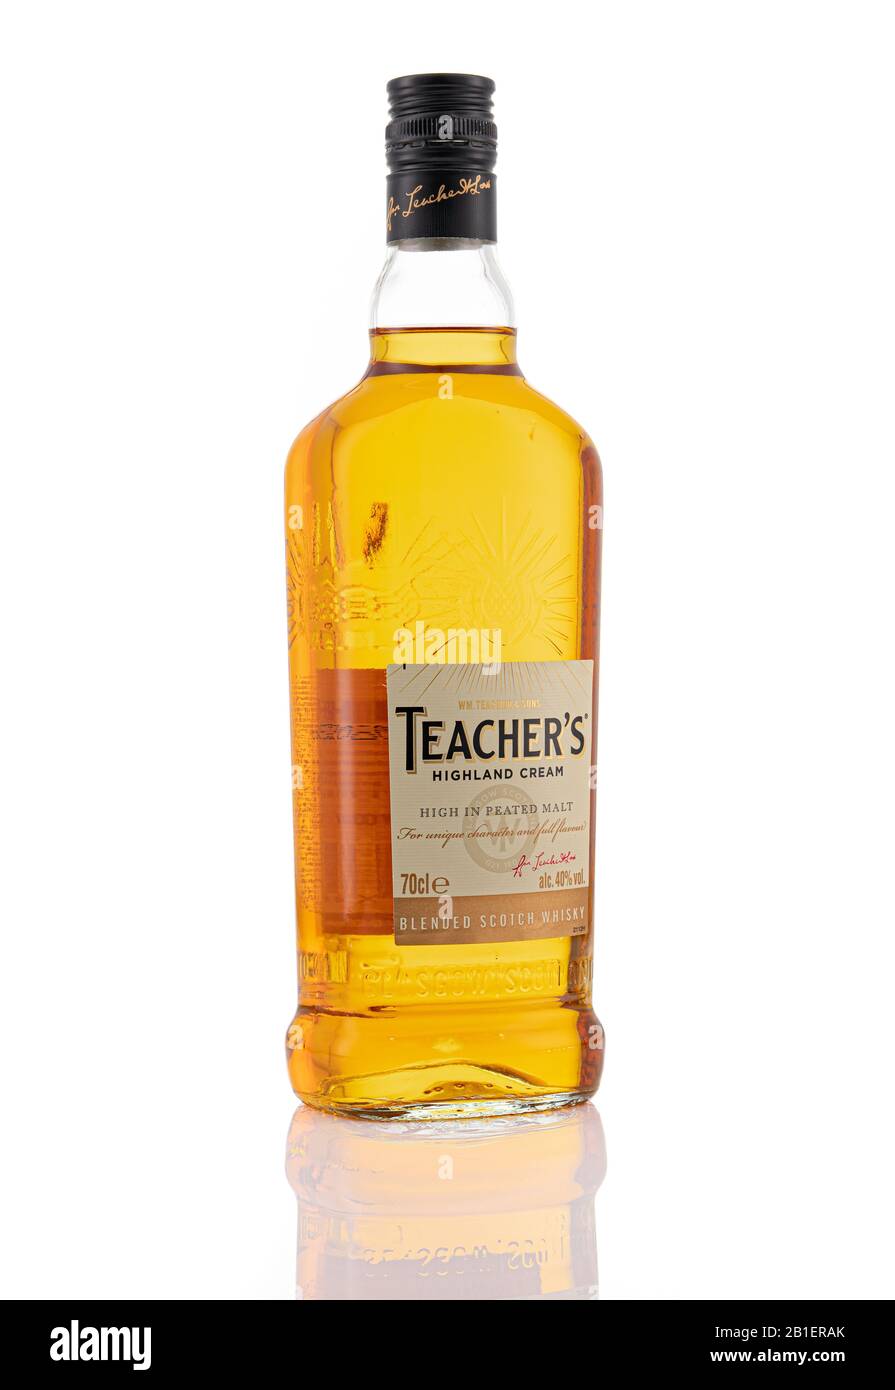 Buy William Lawson Regular Scotch Whisky at Best Prices on Jaipur